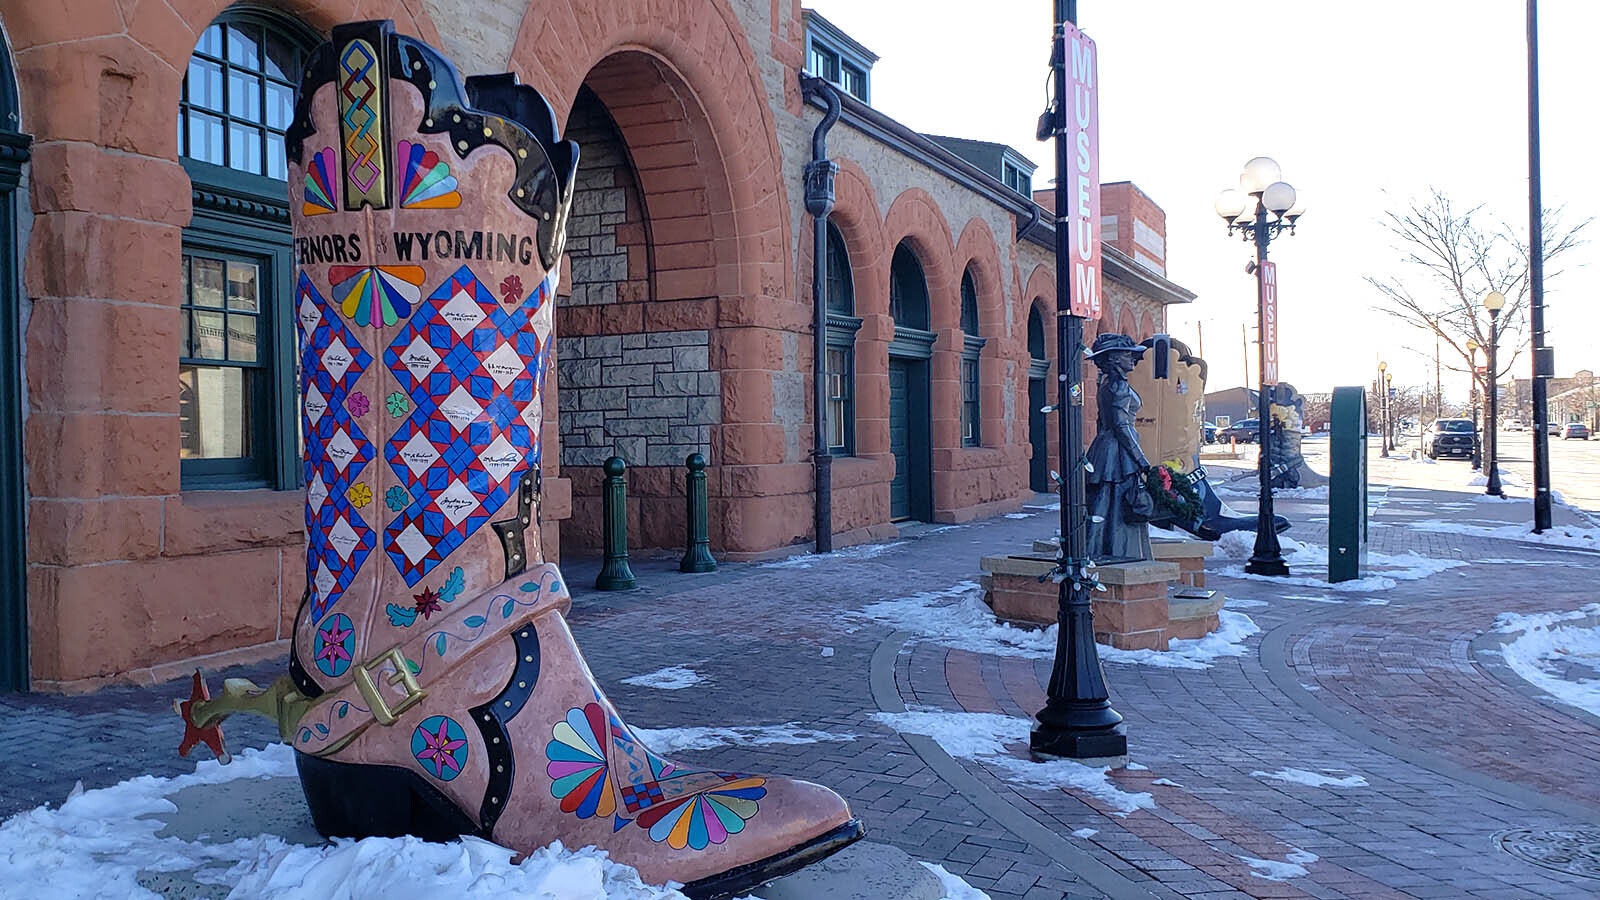 One of several Big Boots on an audio walking tour at Union Pacific Depot in Cheyenne. This particular boot features the signatures of all Wyomings governors in a quilt block pattern that celebrates Wyoming culture and history.